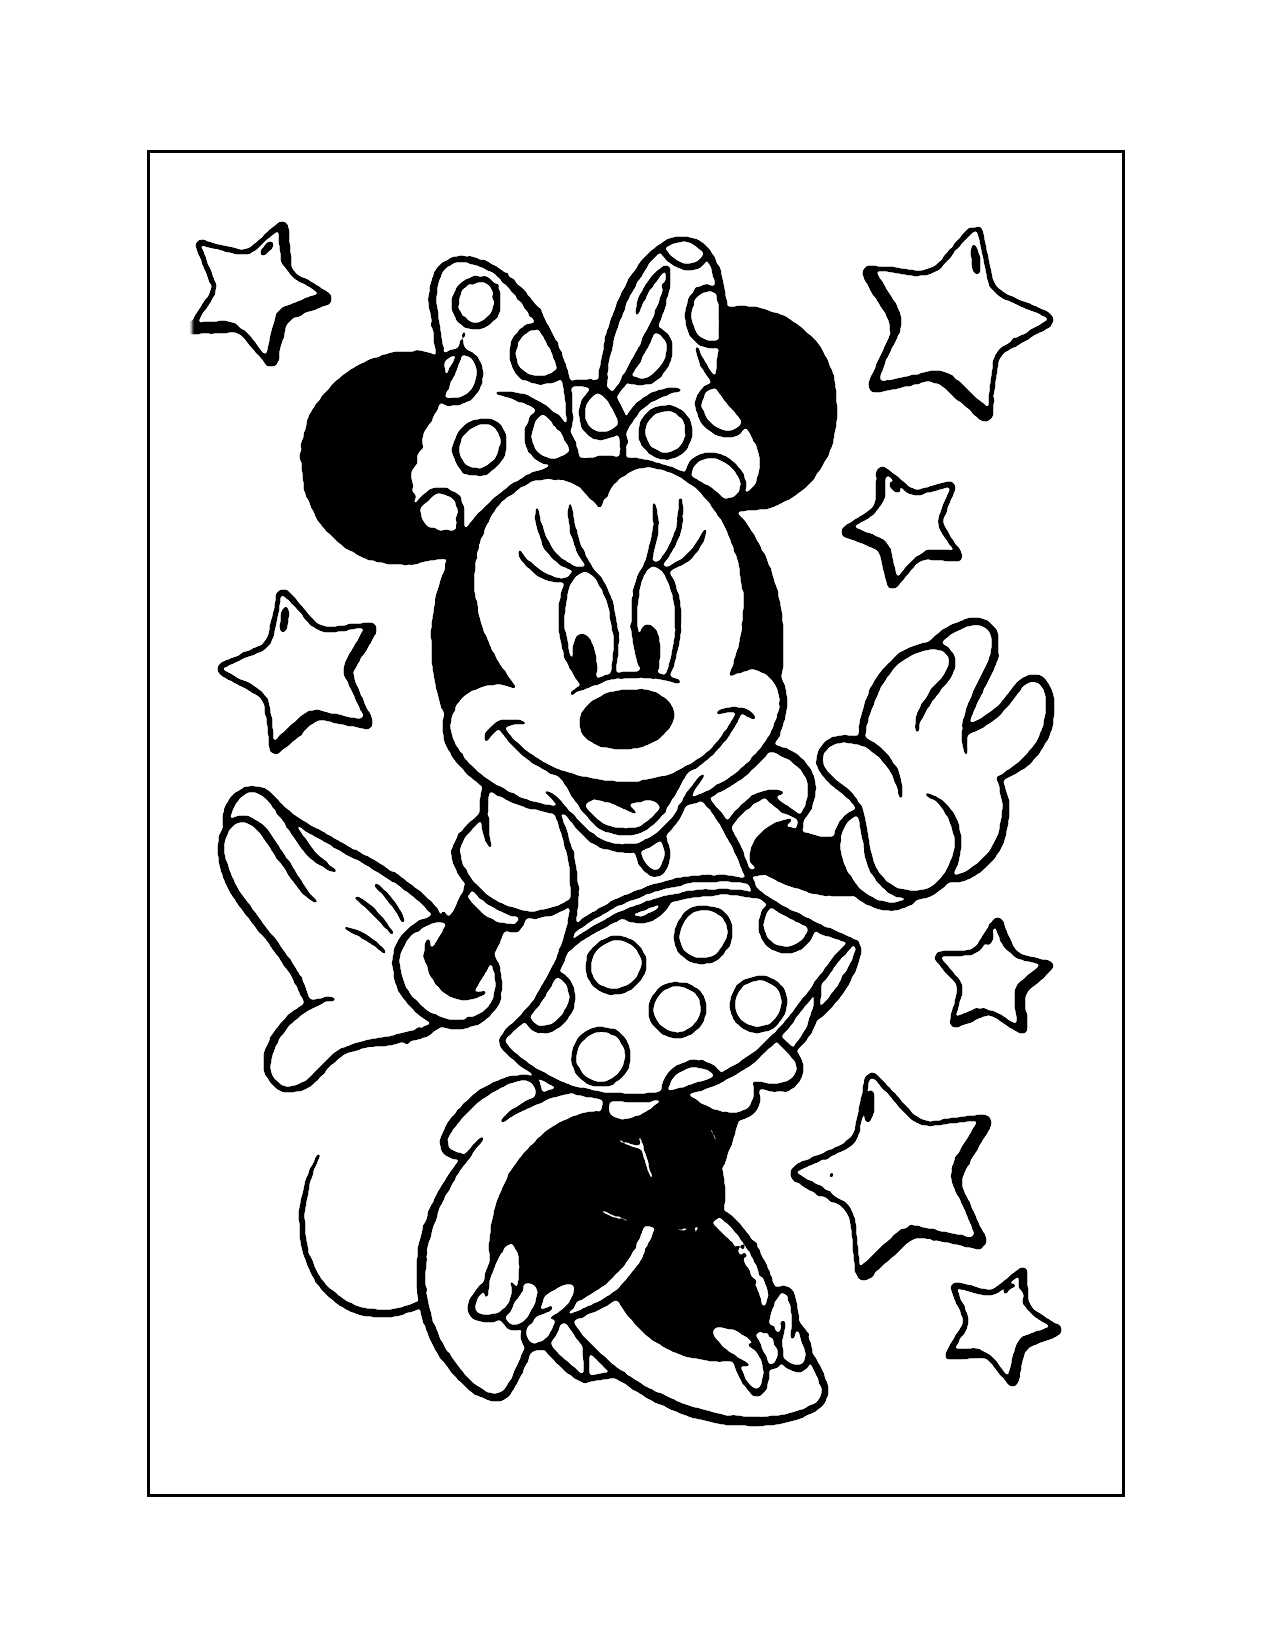 Minnie Mouse In Polka Dots Coloring Page